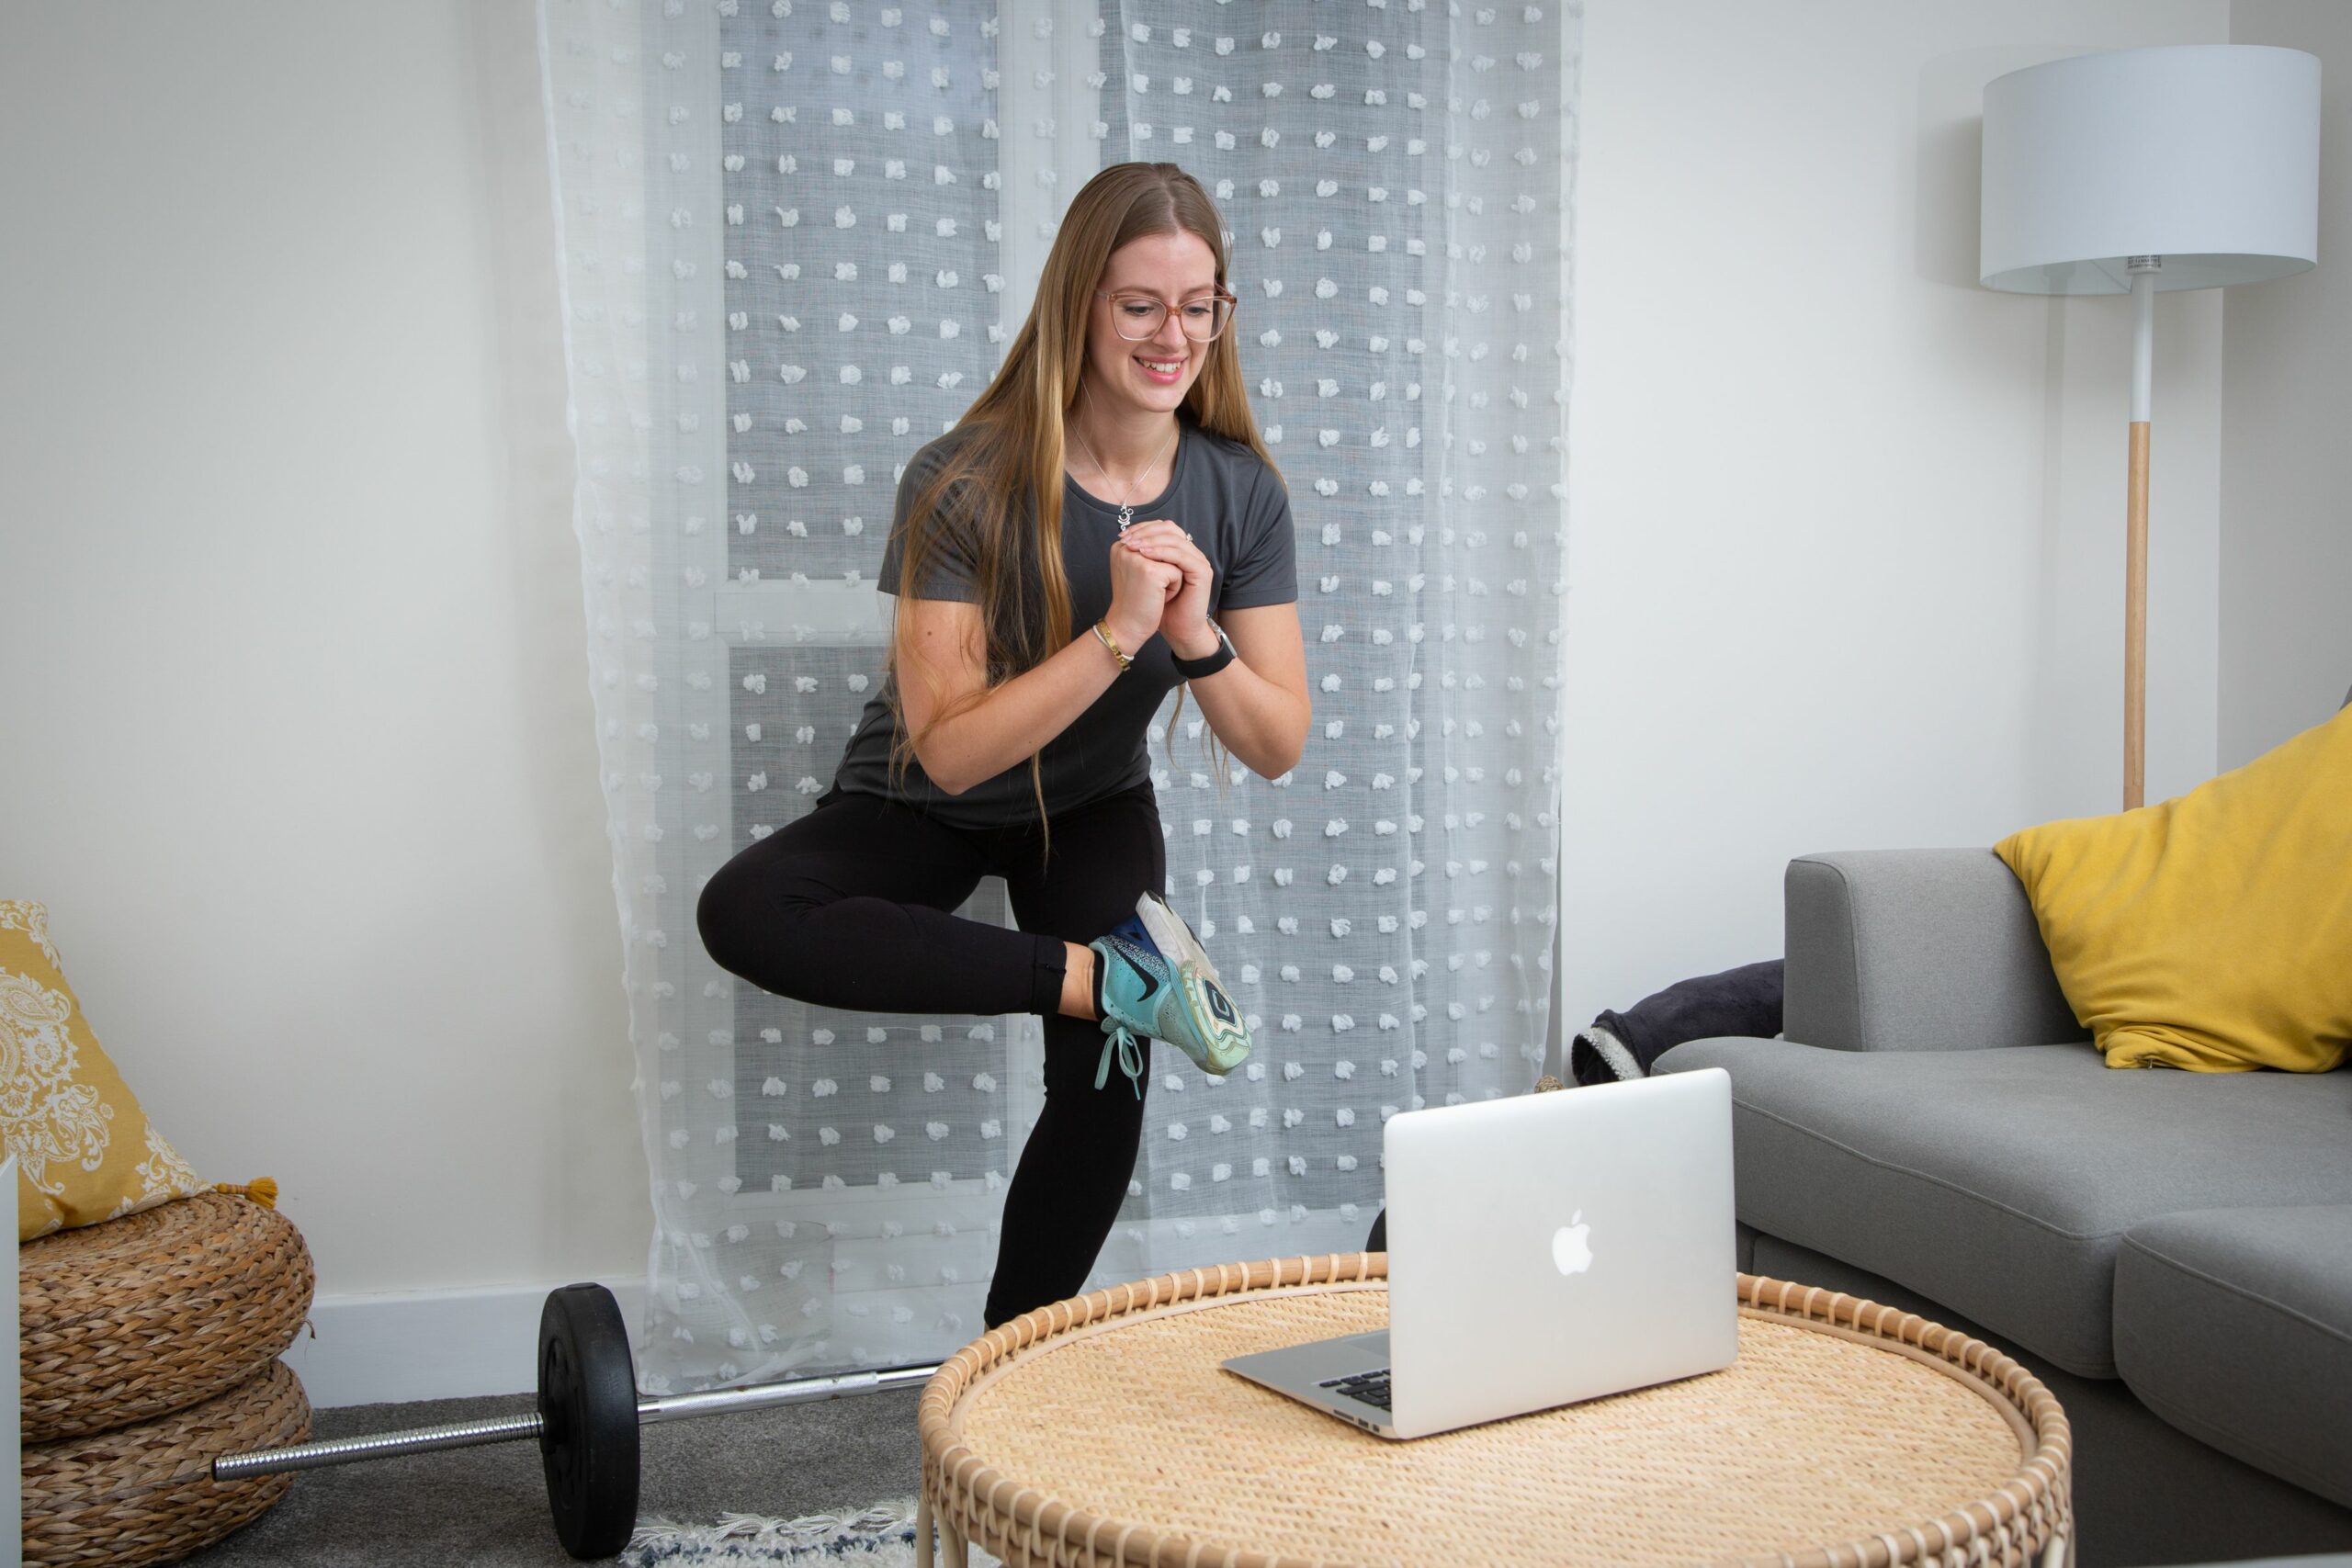 Hannah demonstrates glute stretch in online session